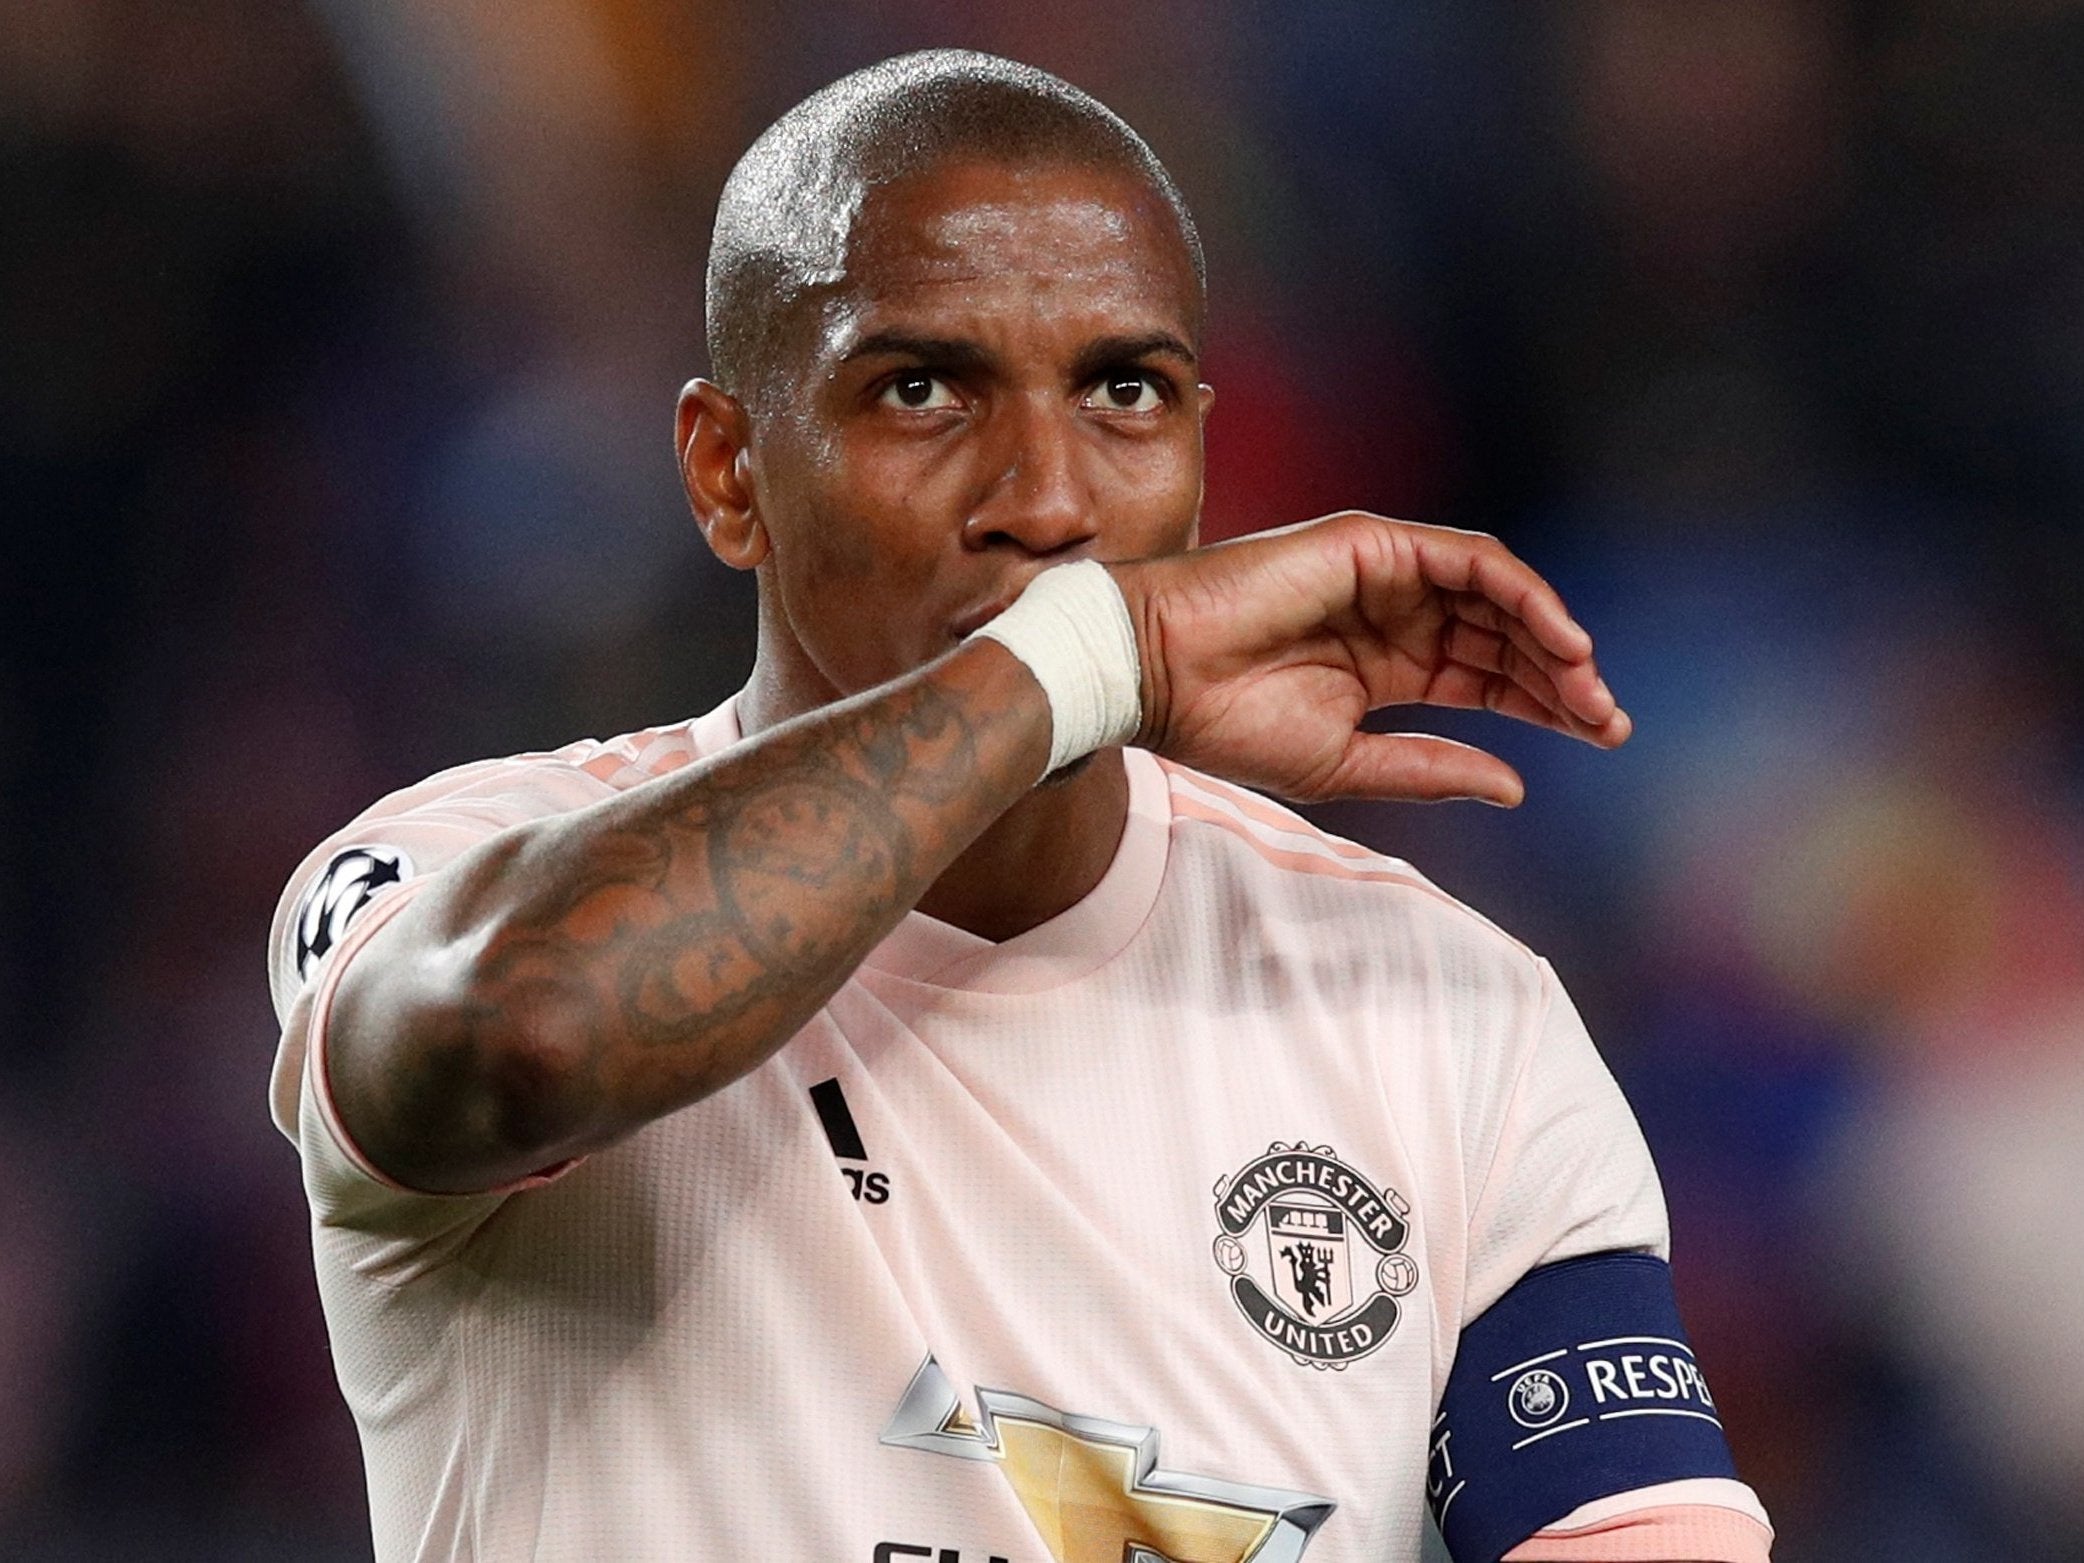 Ashley Young was targeted with vile racist abuse on Twitter